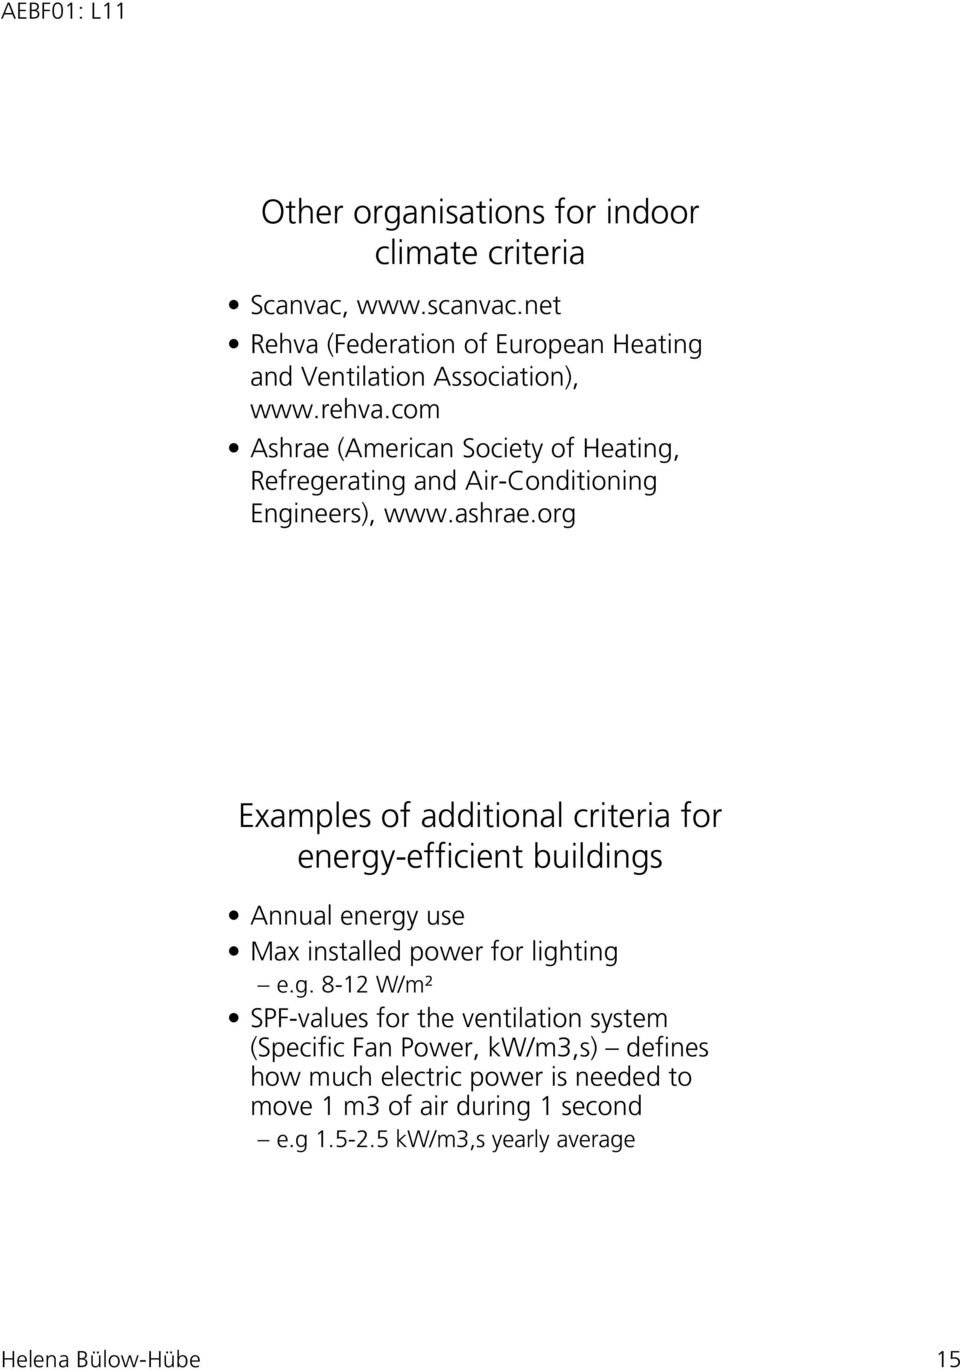 org Examples of additional criteria for energy-efficient buildings Annual energy use Max installed power for lighting e.g. 8-12 W/m² SPF-values